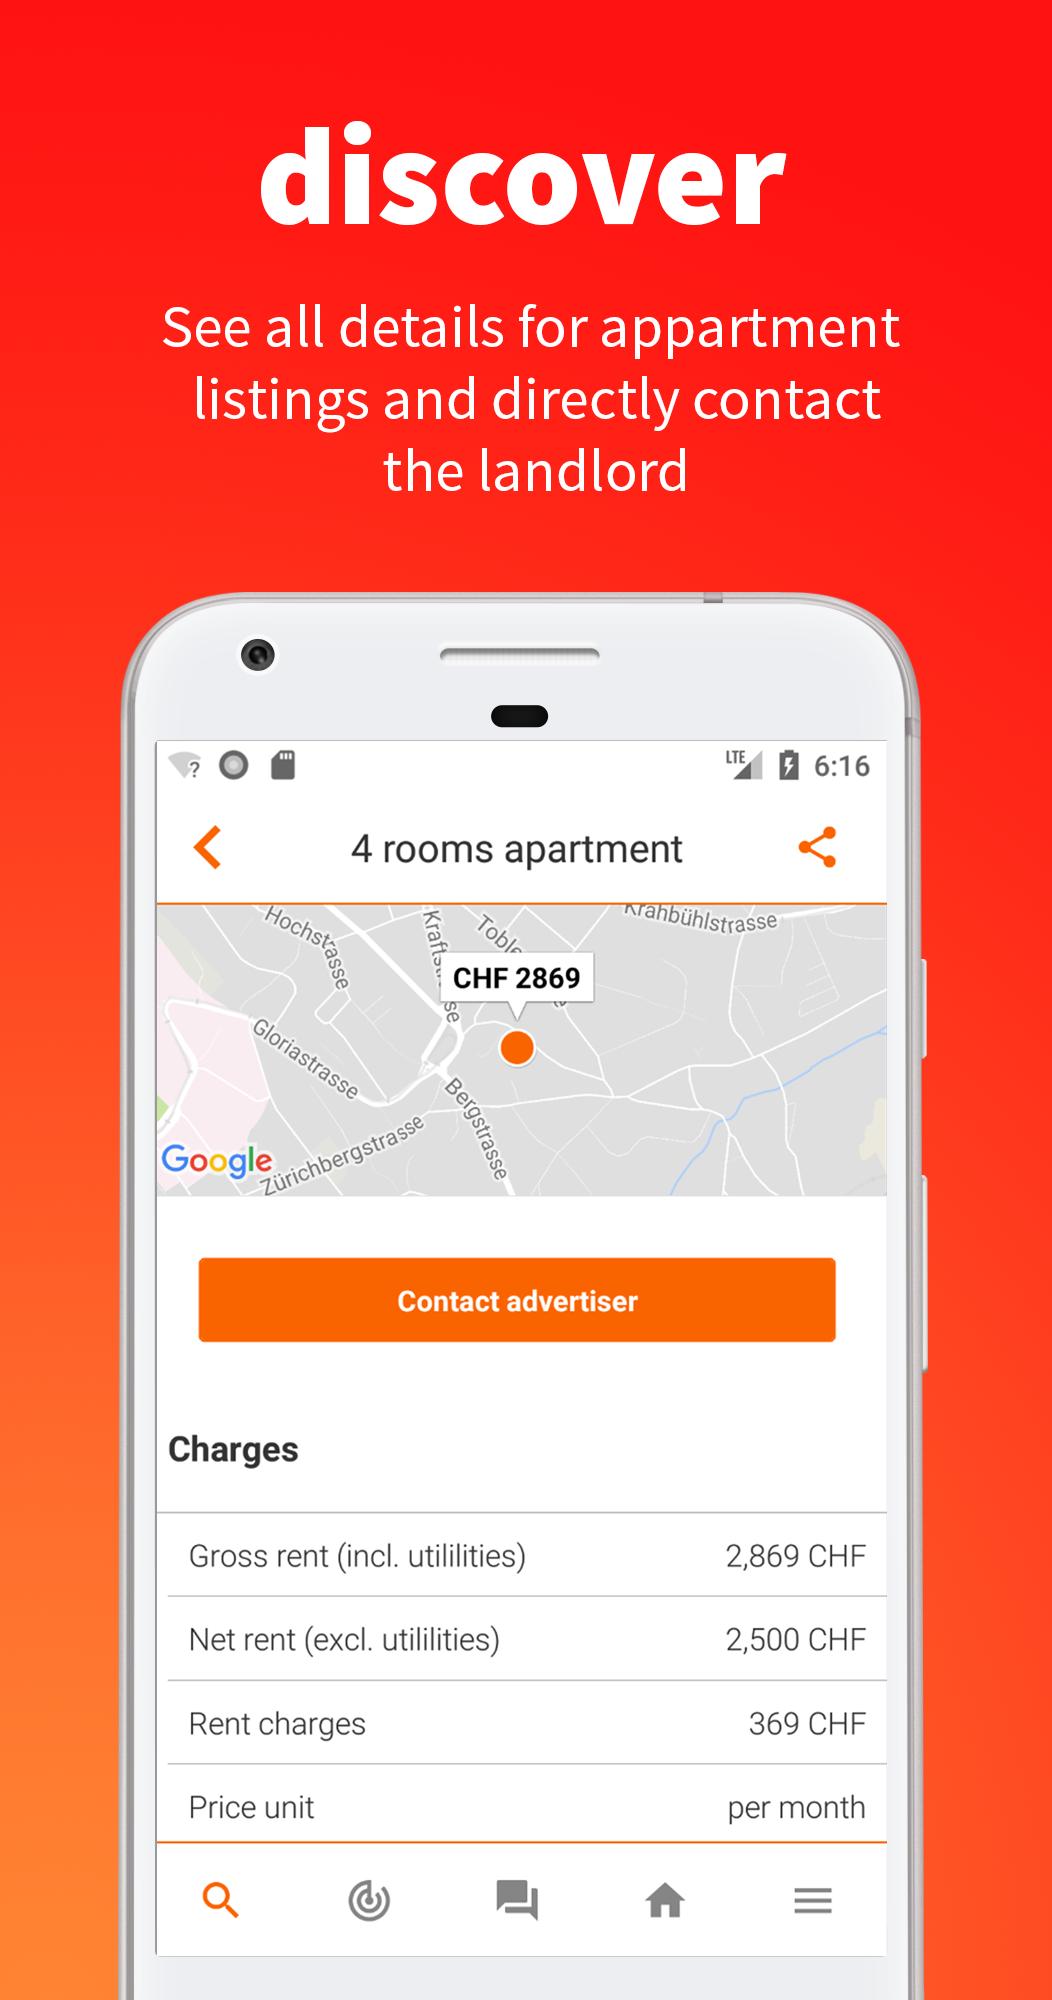 Flatfox Search & advertise apartments for free 3.5.4 Screenshot 3